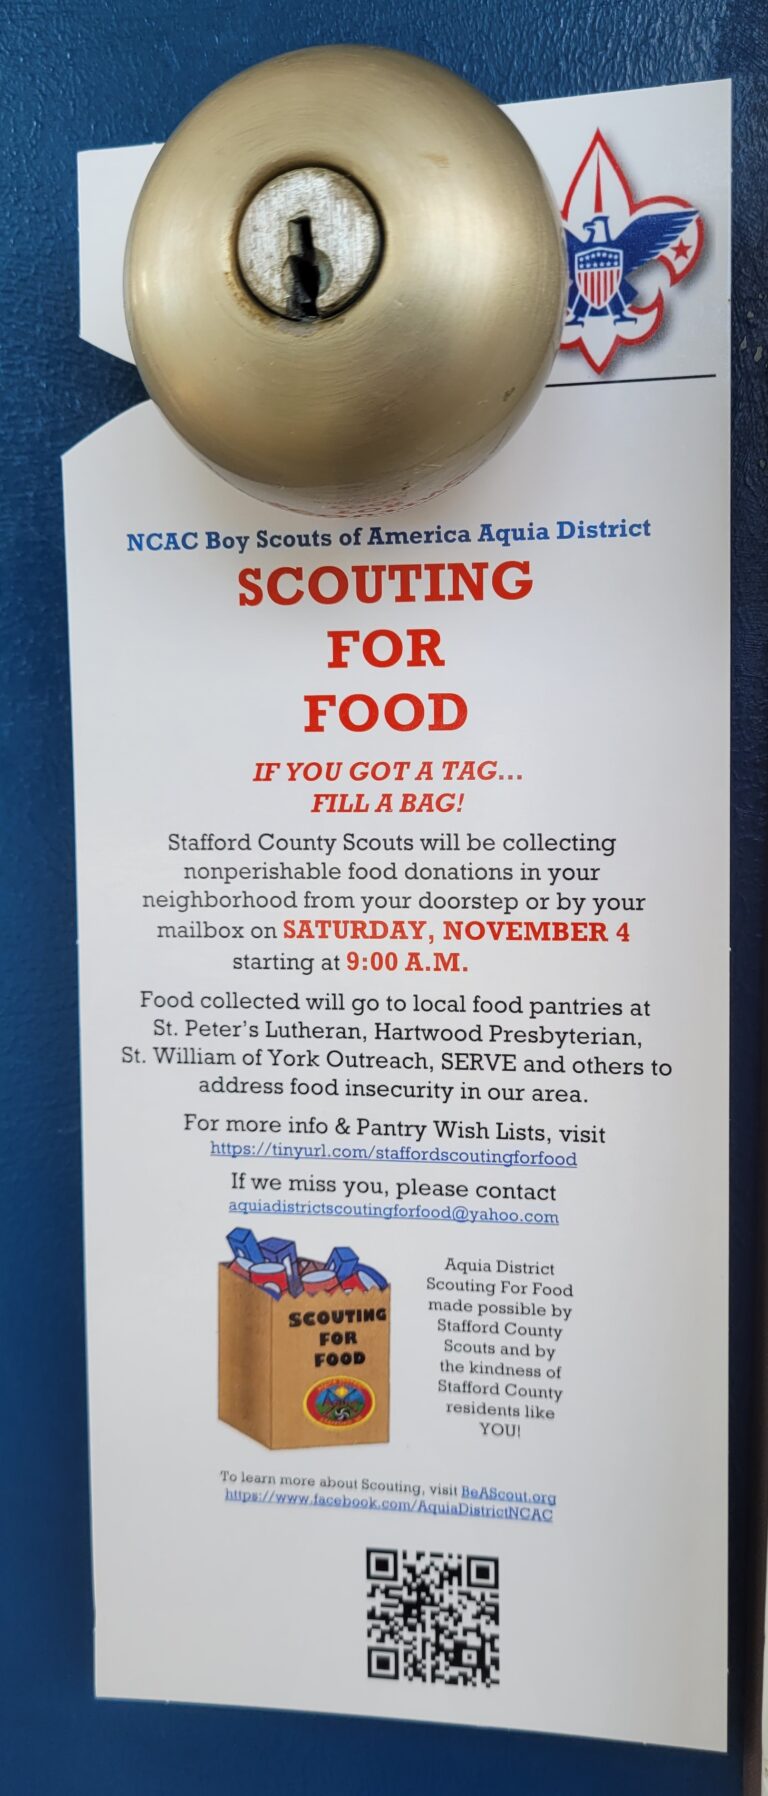 2023 Aquia District BSA Scouting For Food